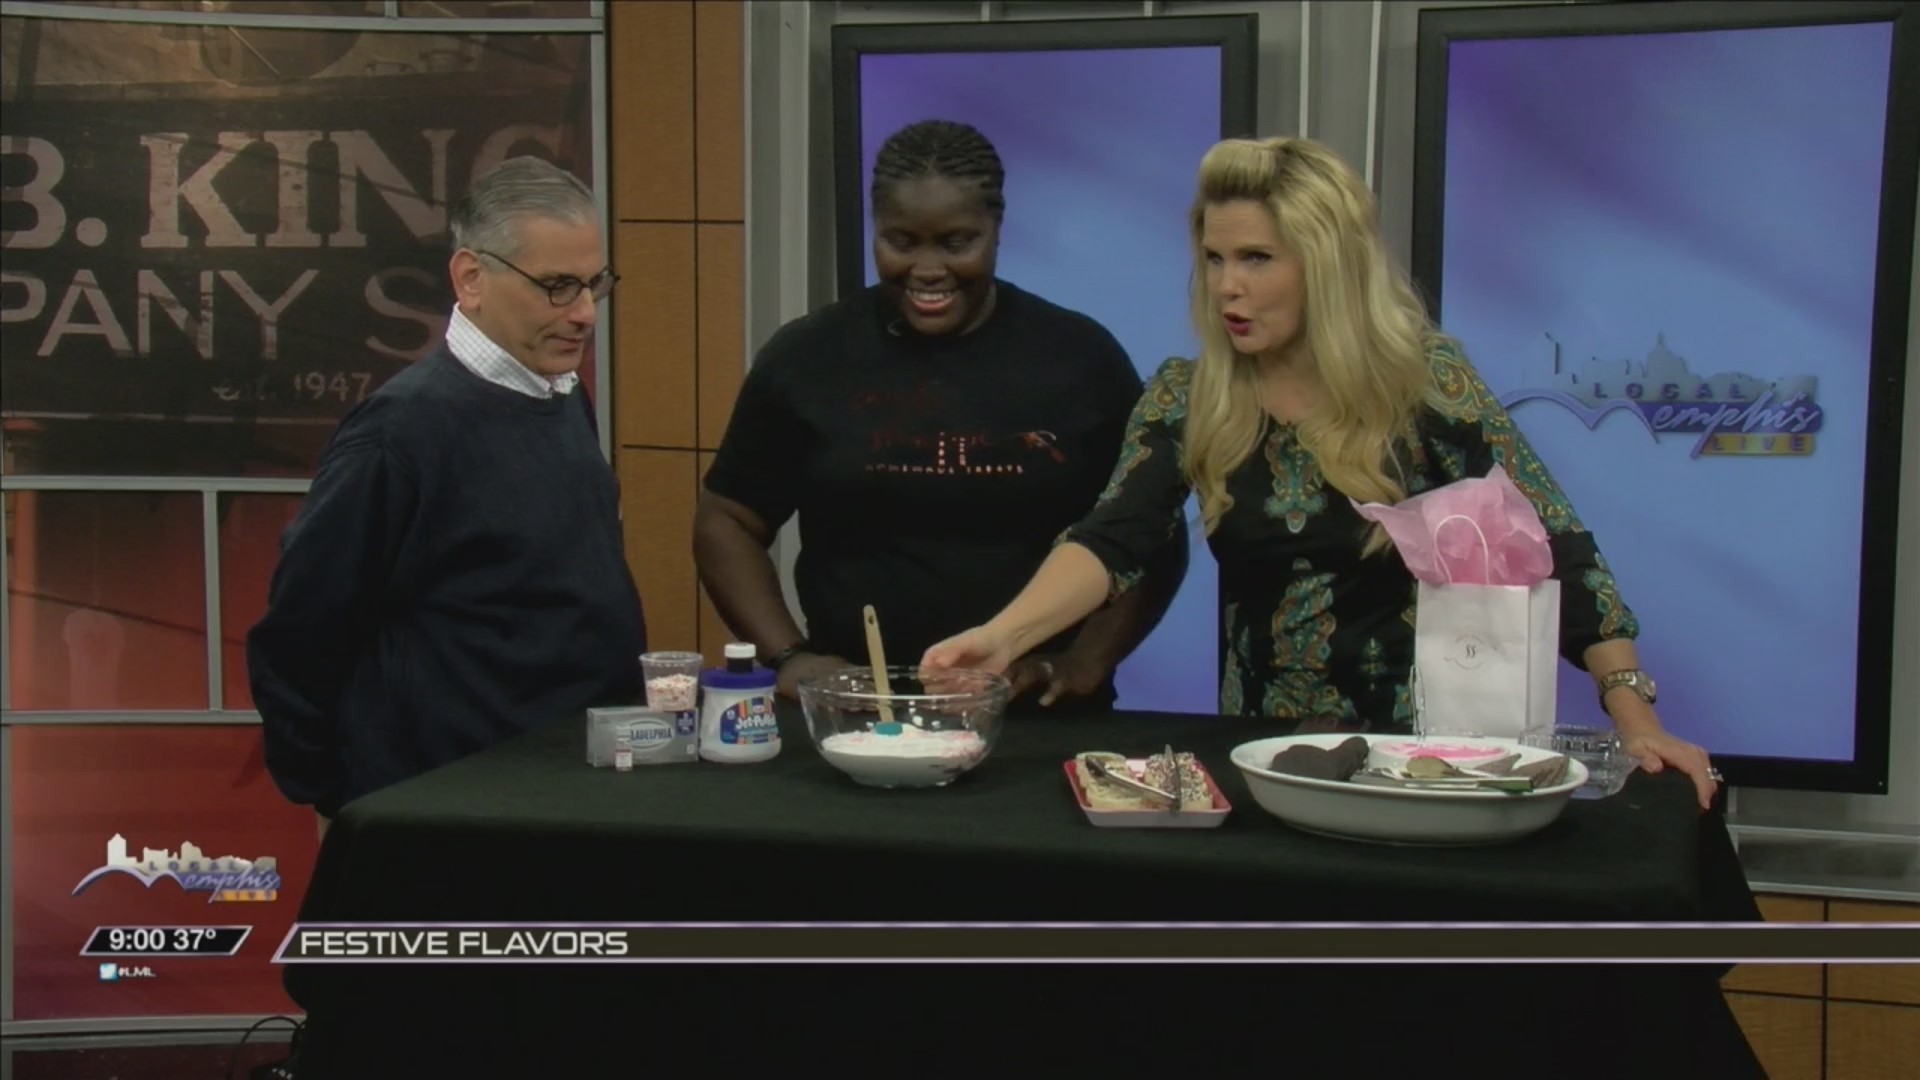 OUR FIRST GUEST TODAY ARE CELEBRATING THE HOLIDAYS WITH FESTIVALS GALLORE--AND FRESH ON THE HEELS OF SMALL BUSINESS SATURDAY THEY ARE ALSO CELEBRATING FESTIVE FLAVORS WITH THE TASTES OF THE 901, WELCOME FROM THE SWEET SHOPPE, ELAINE BOWEN TO TELL US ABOUT A FREE EVENT WHERE WE CAN GET LOCALLY MADE TREATS